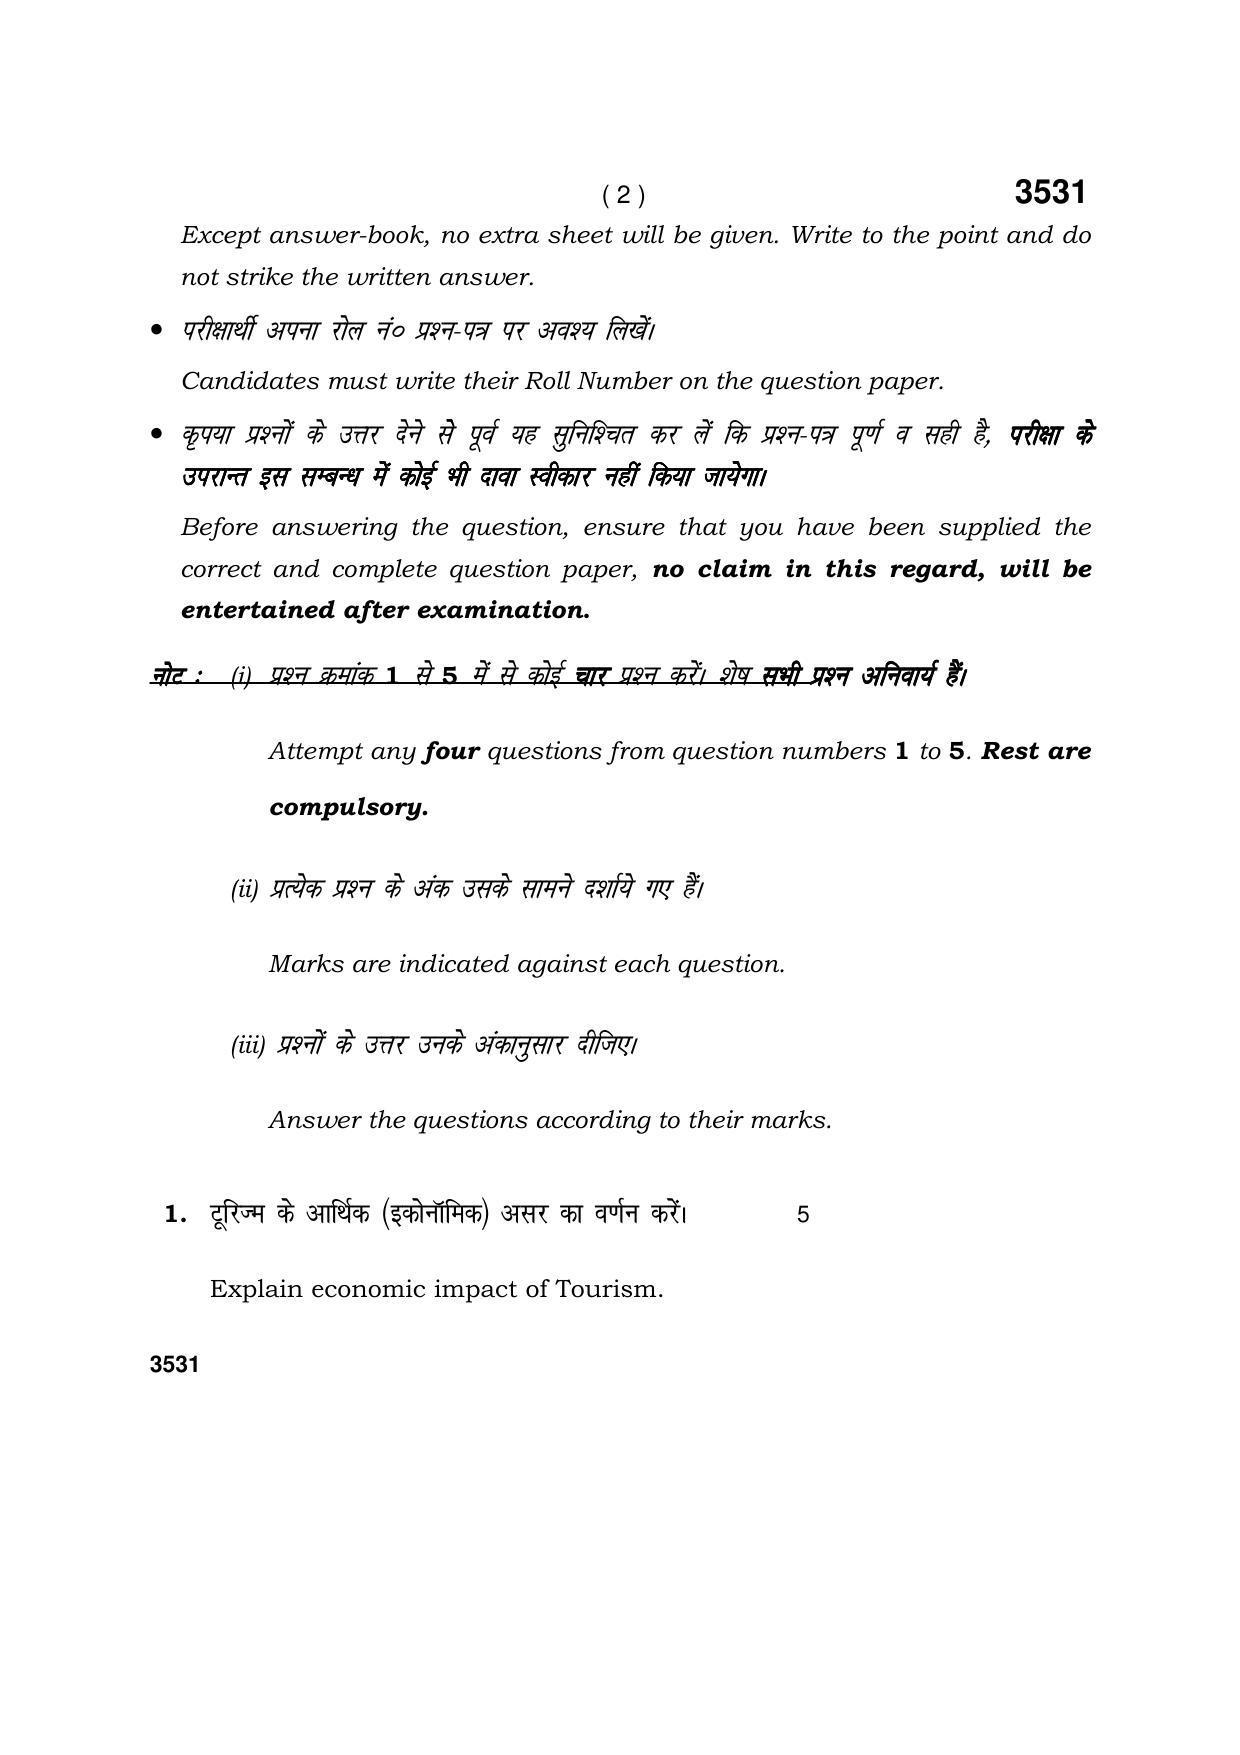 Haryana Board HBSE Class 10 Tourism -Hospitality 2018 Question Paper - Page 2